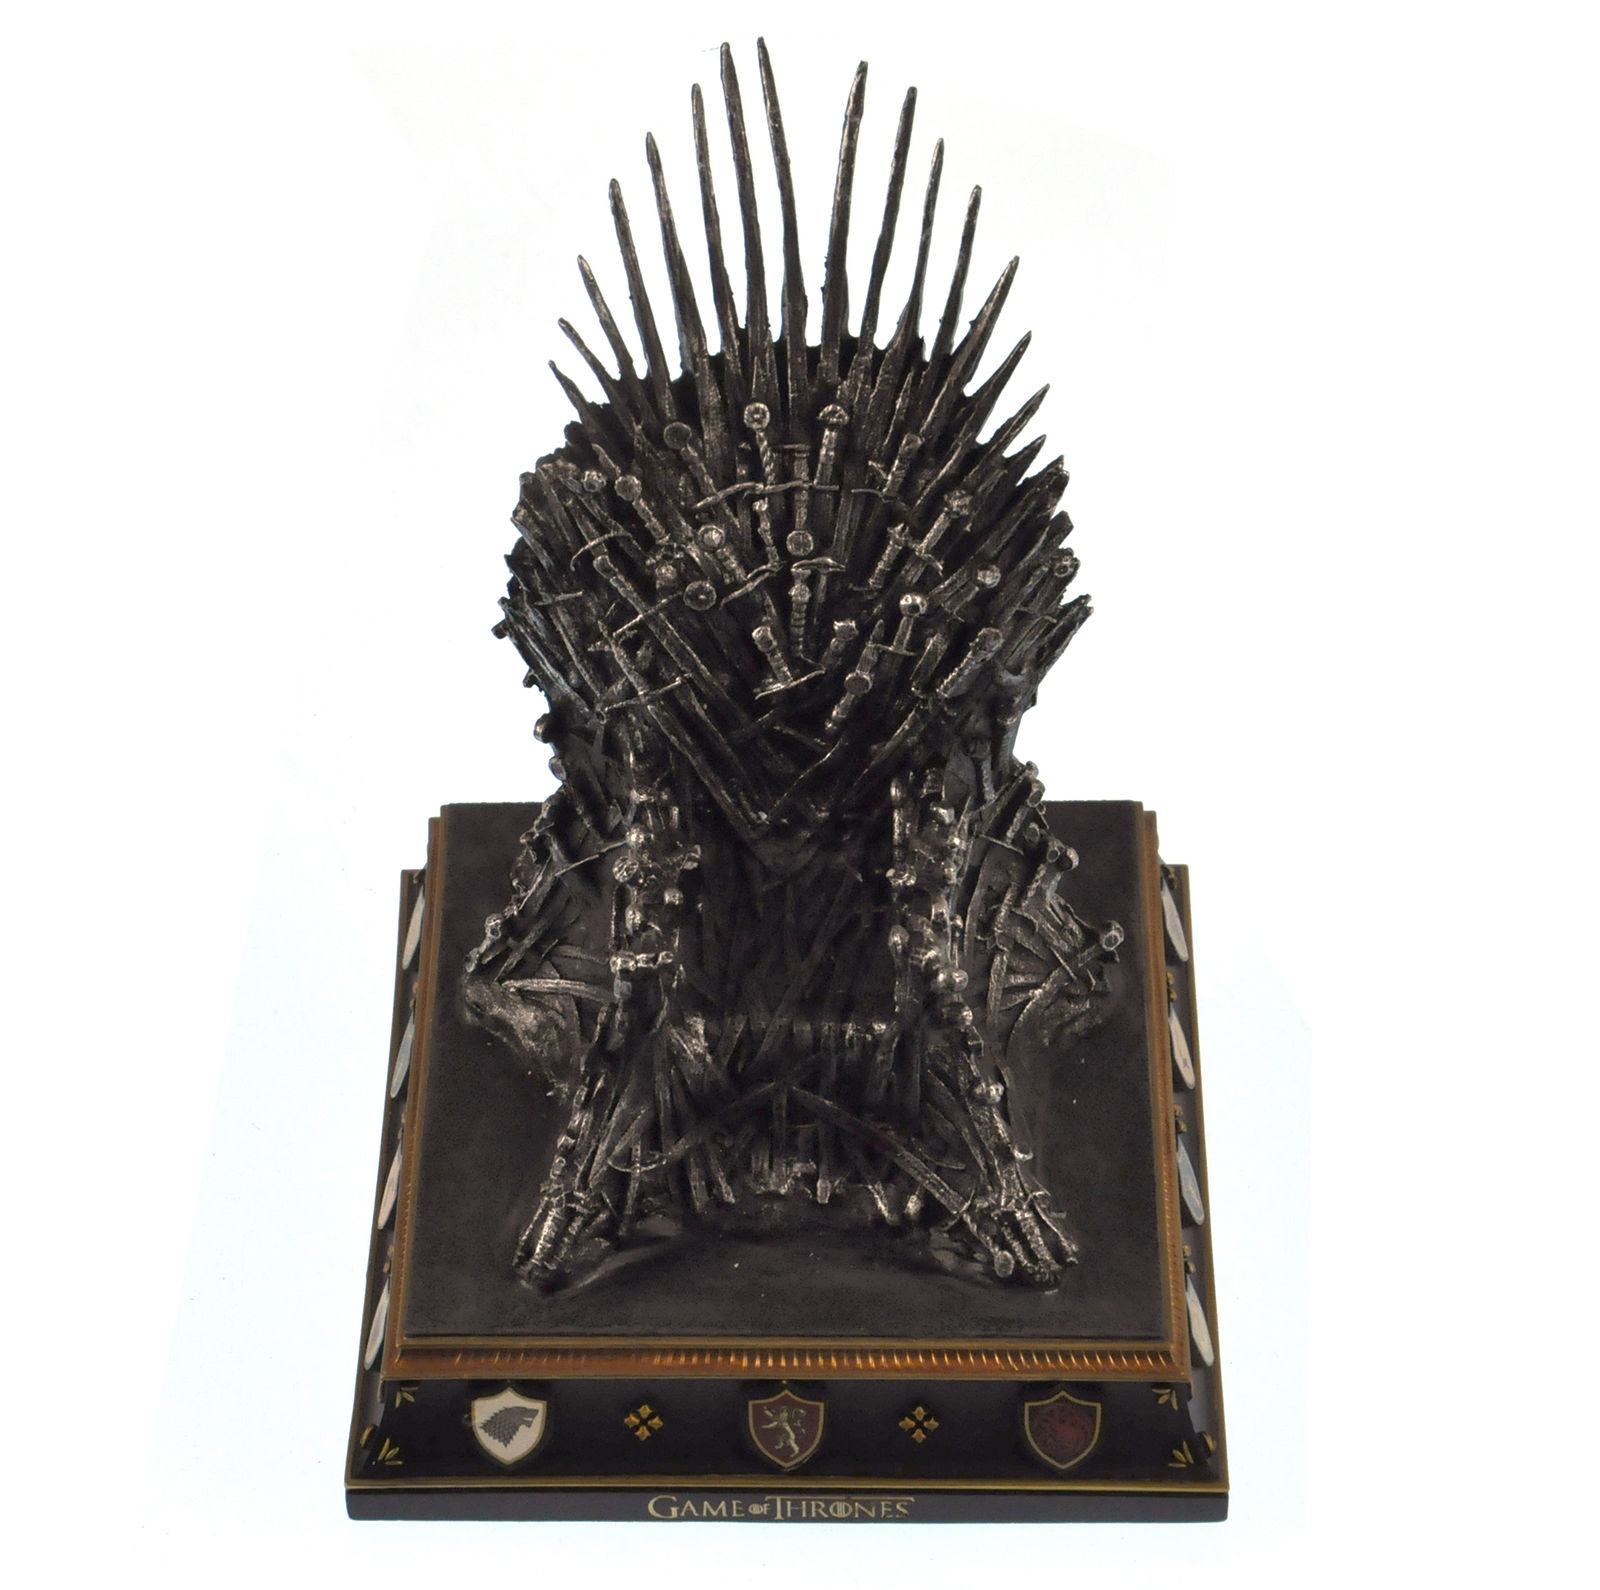 The Iron Throne - The Game of Thrones Replica